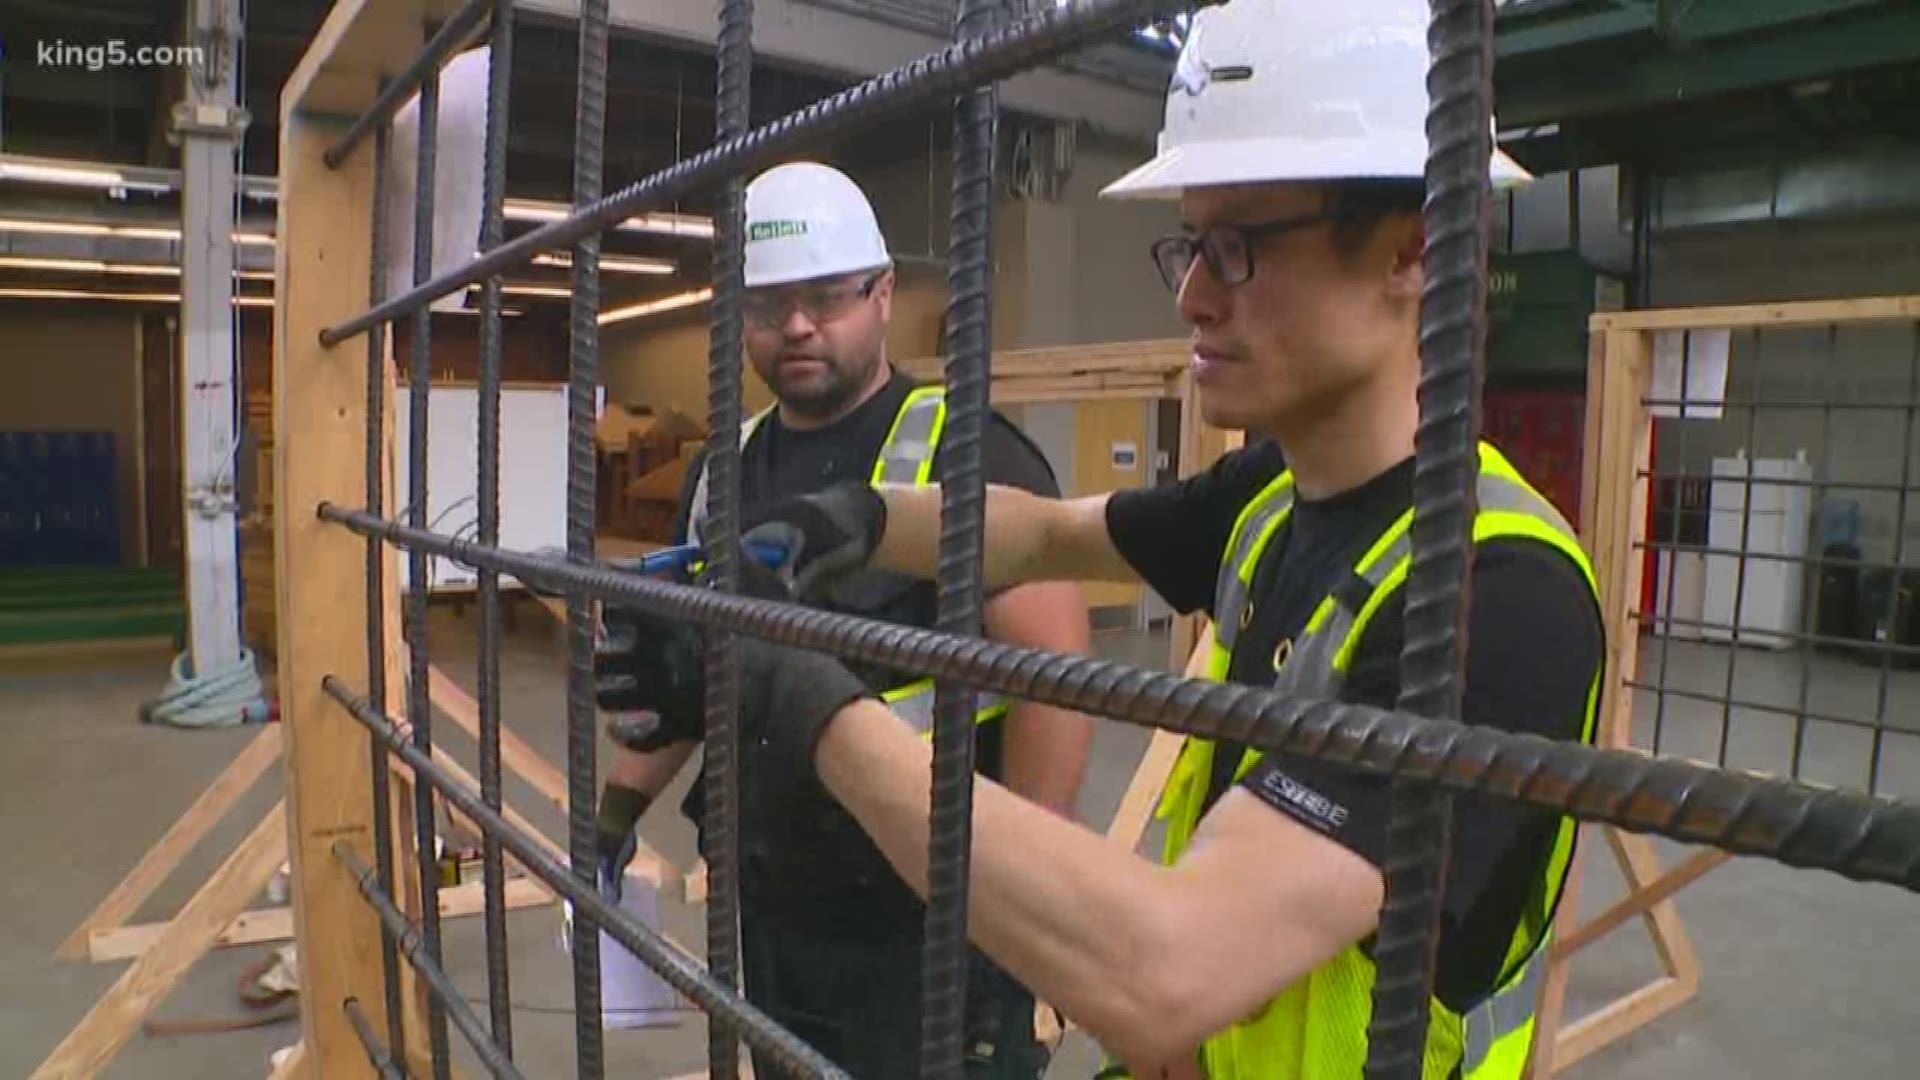 A summer program is helping potential construction workers get up to speed on much-needed skills to help fill an industry labor shortage.